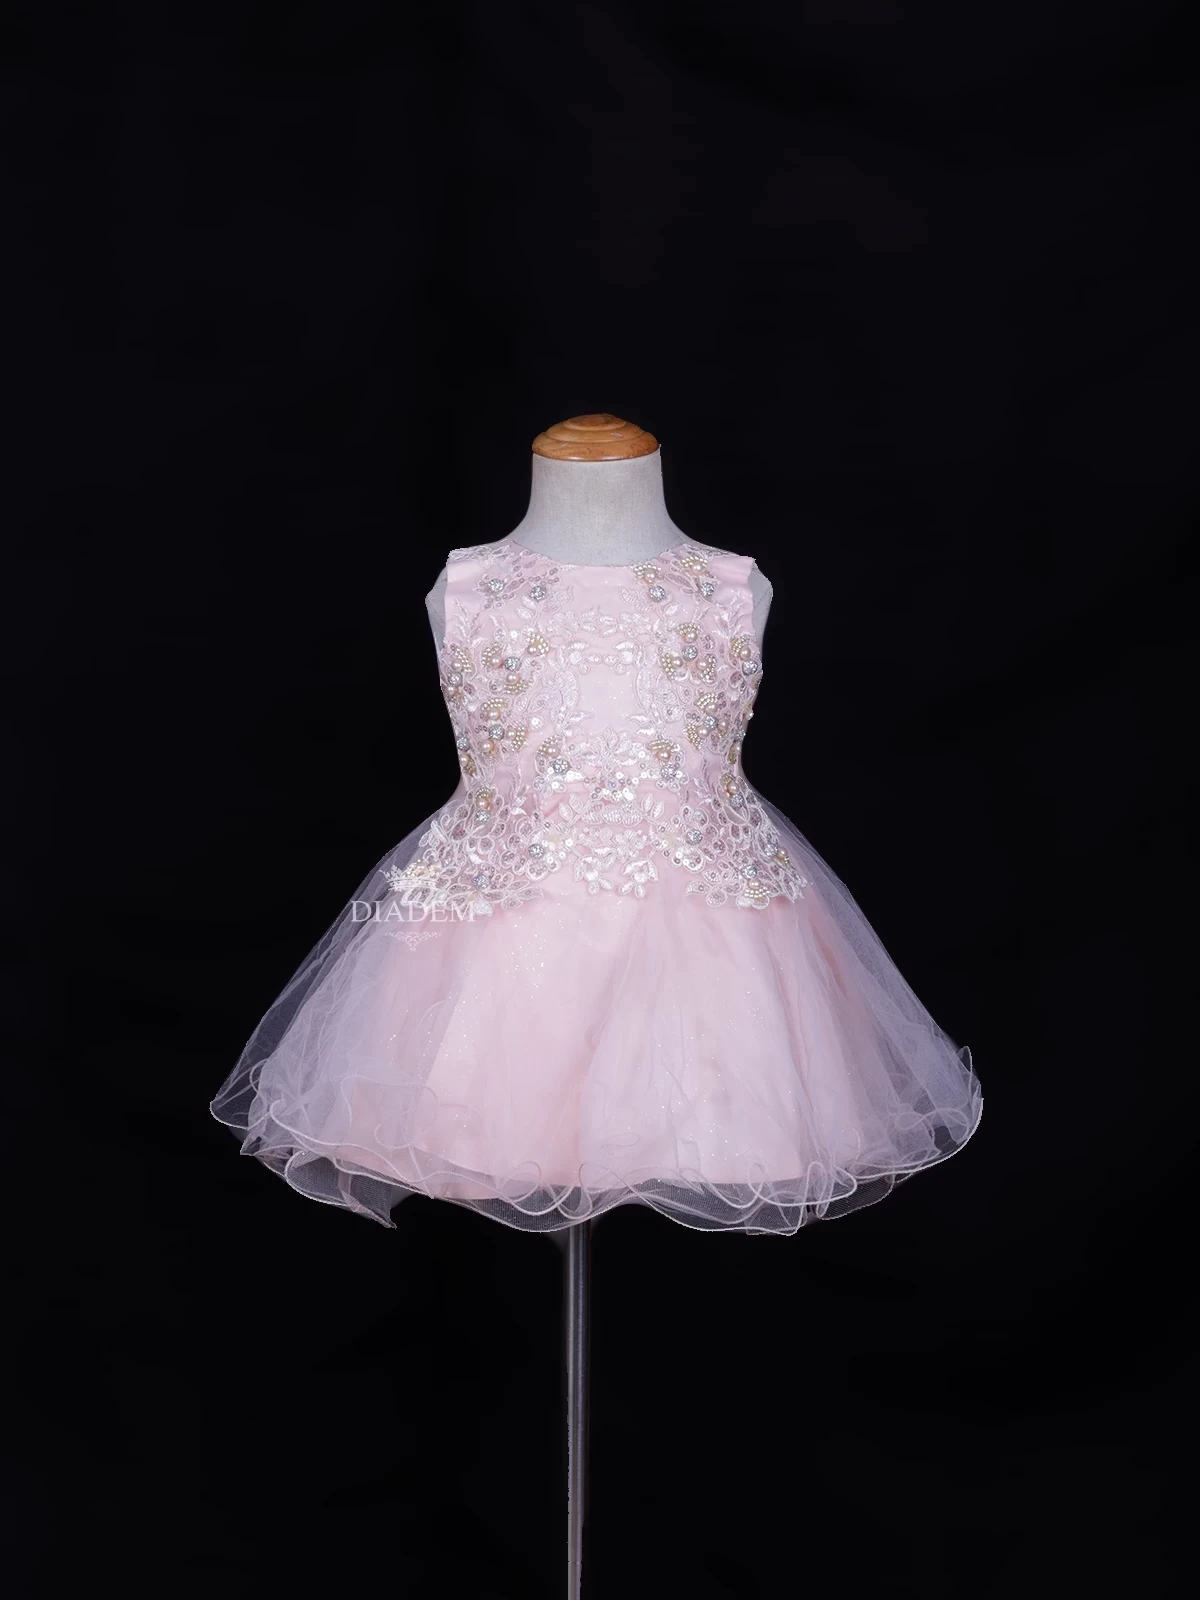 Net Frock Embellished with Floral Laces and Pearl Beads